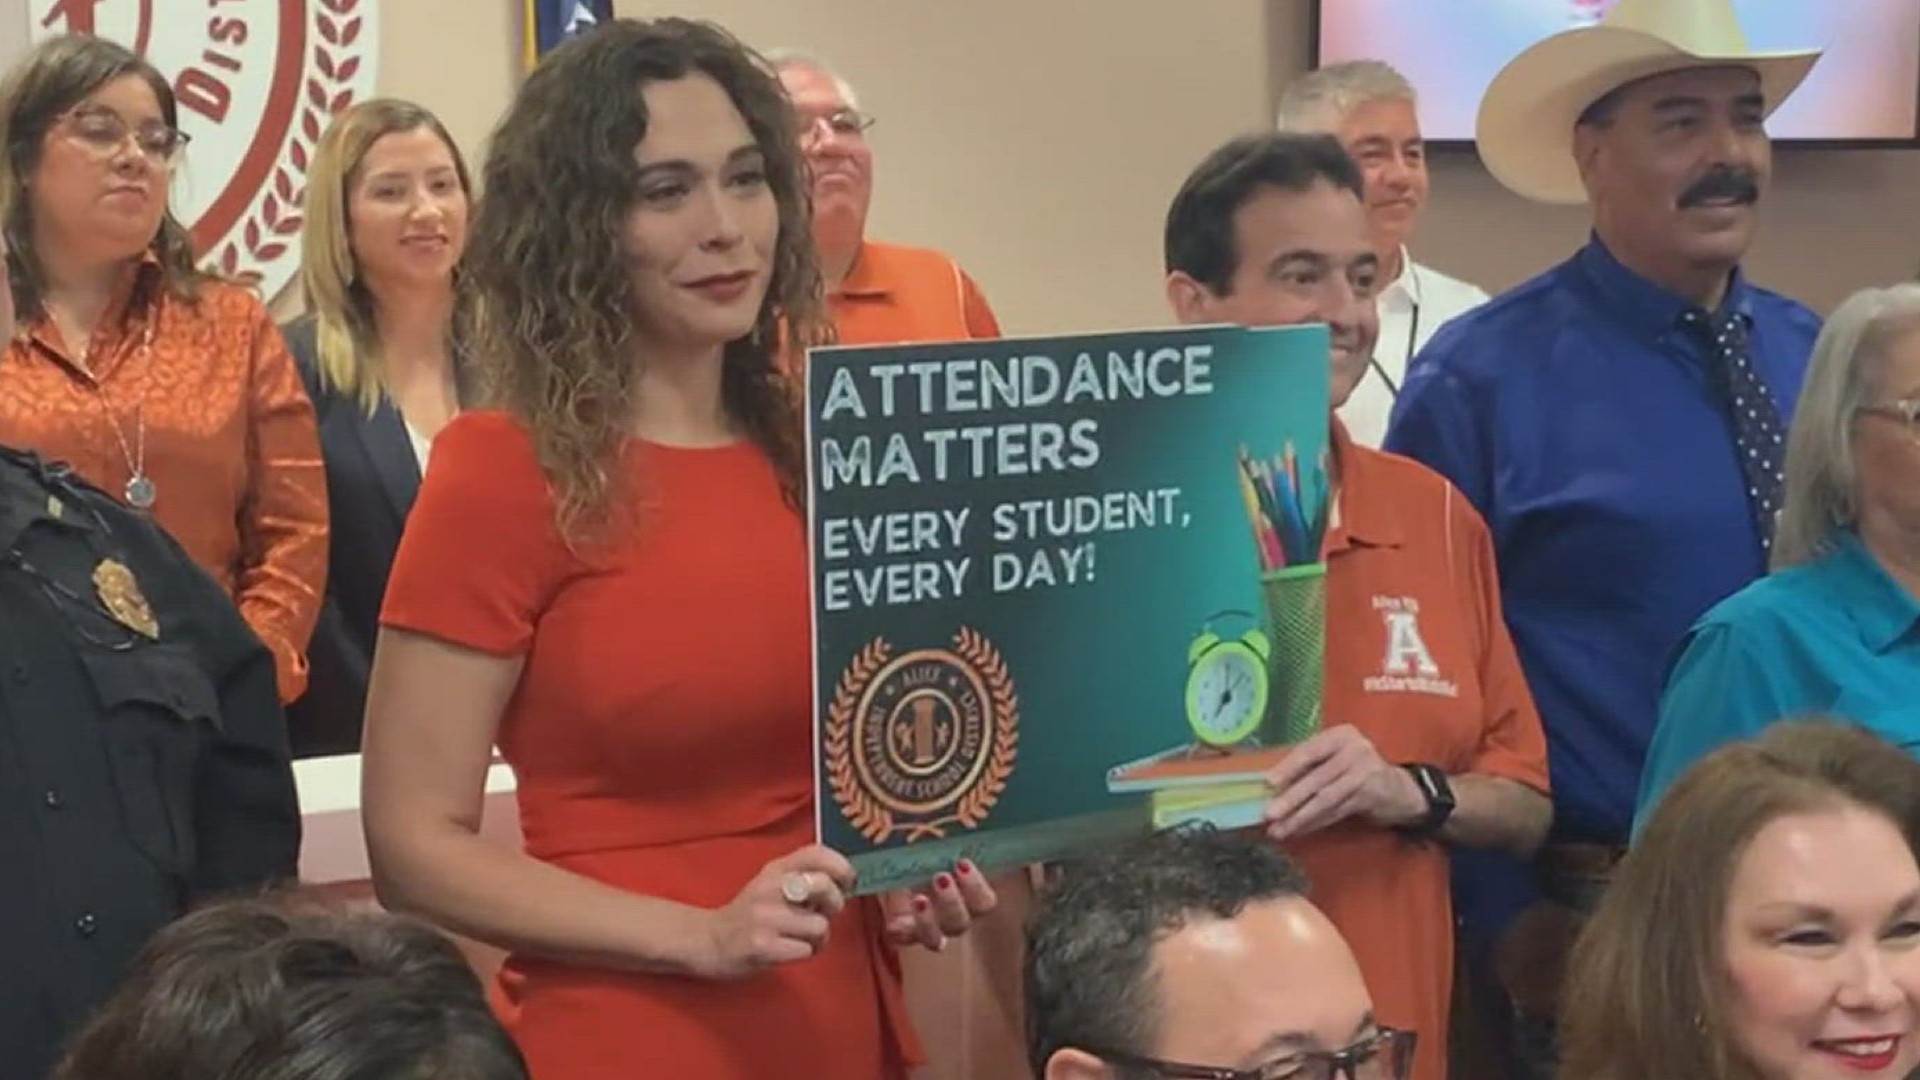 Last year Alice ISD had an 89% attendance rate.  That's below what's expected.